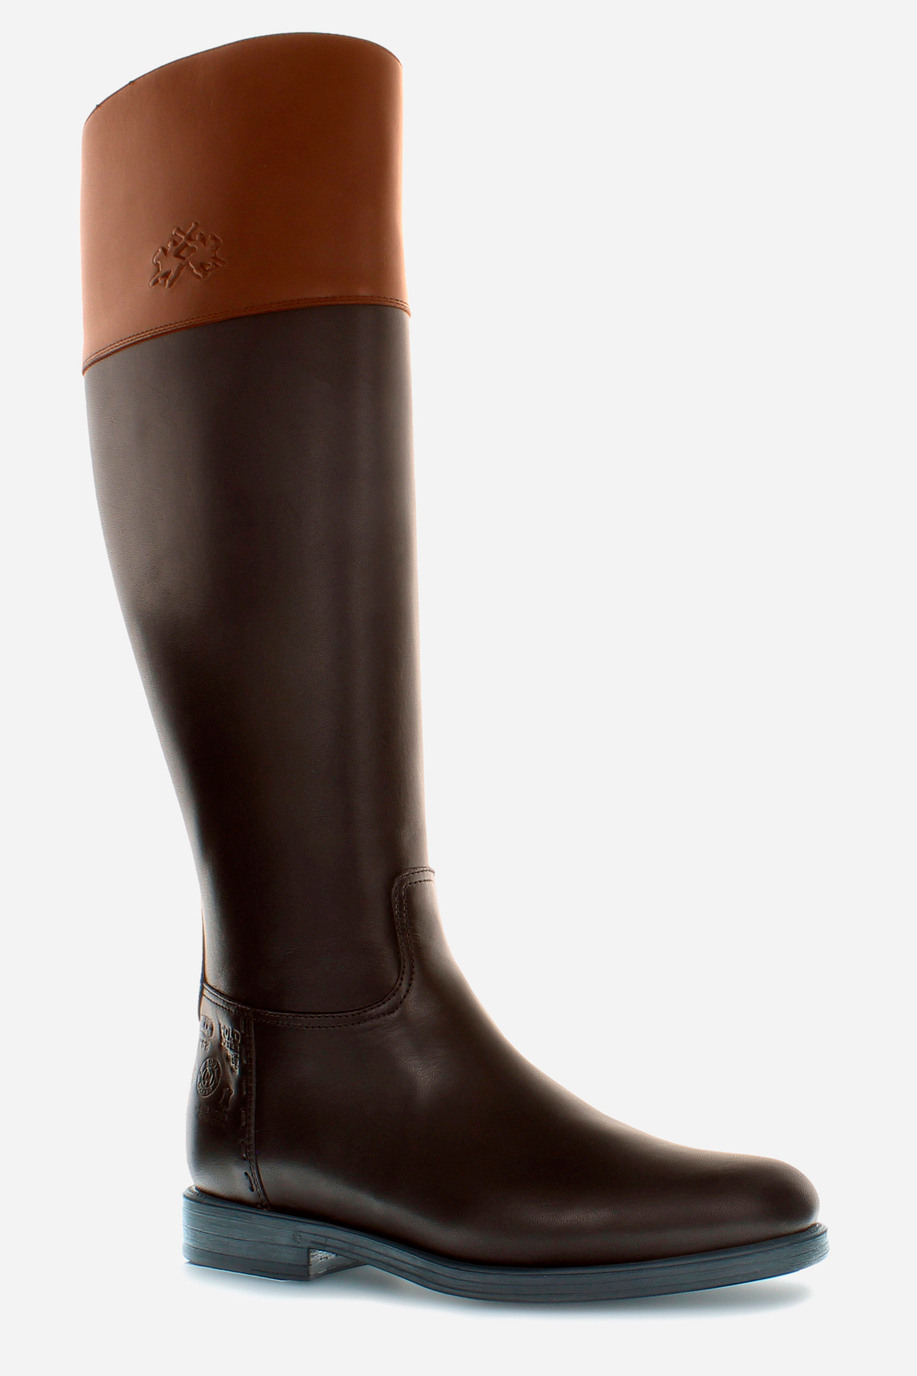 Women's equestrian-inspired boot in soft cowhide - Accessories for her | La Martina - Official Online Shop